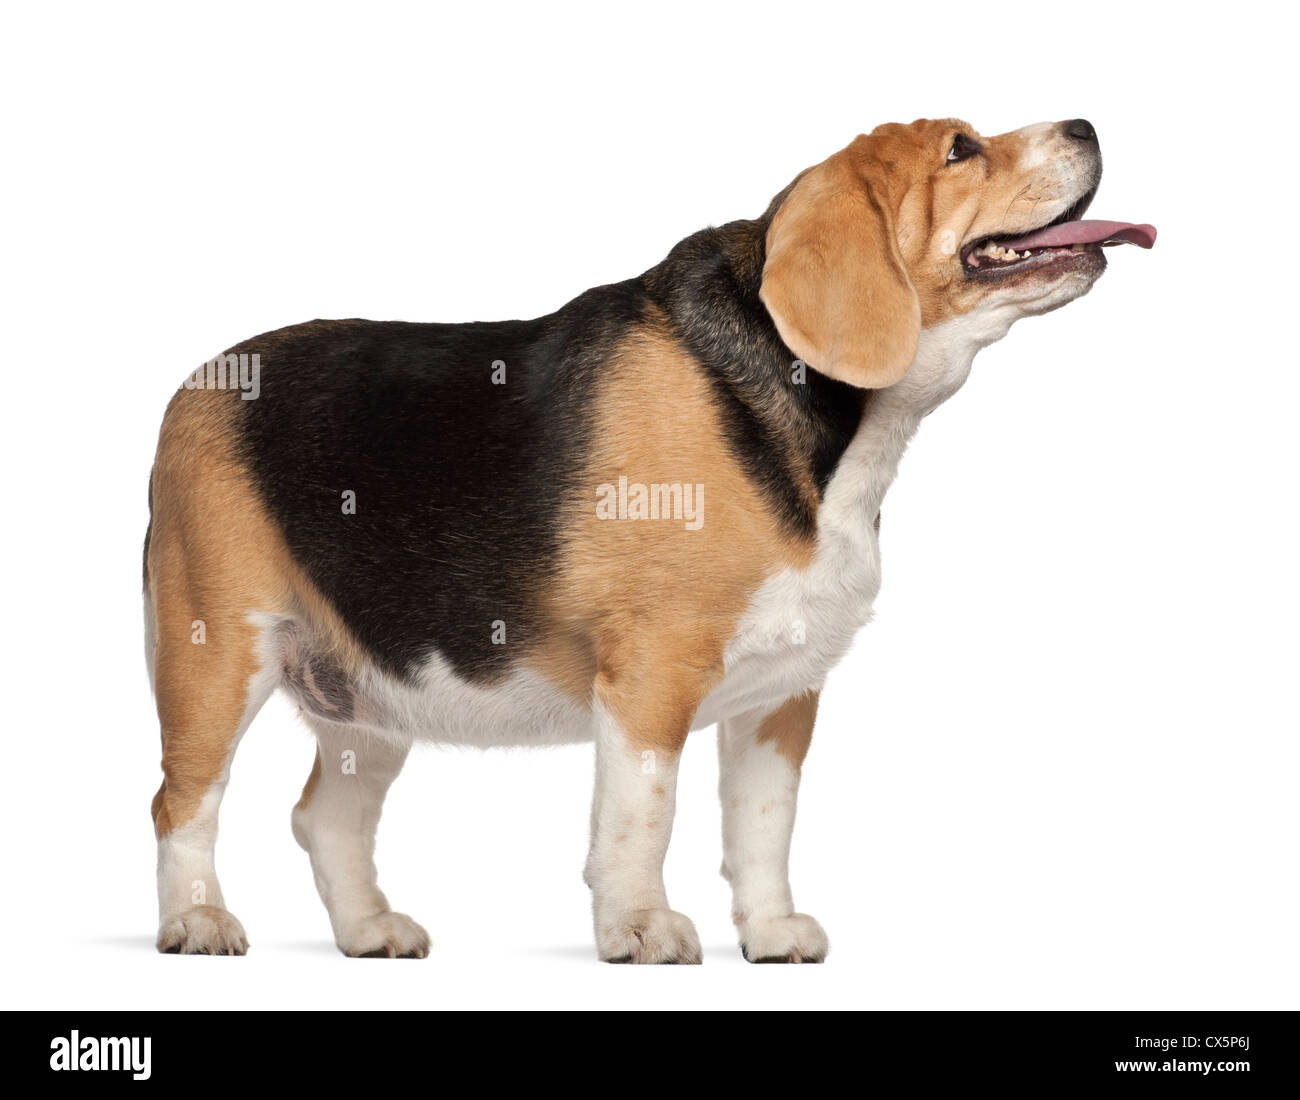 https://c8.alamy.com/comp/CX5P6J/fat-beagle-3-years-old-standing-against-white-background-CX5P6J.jpg